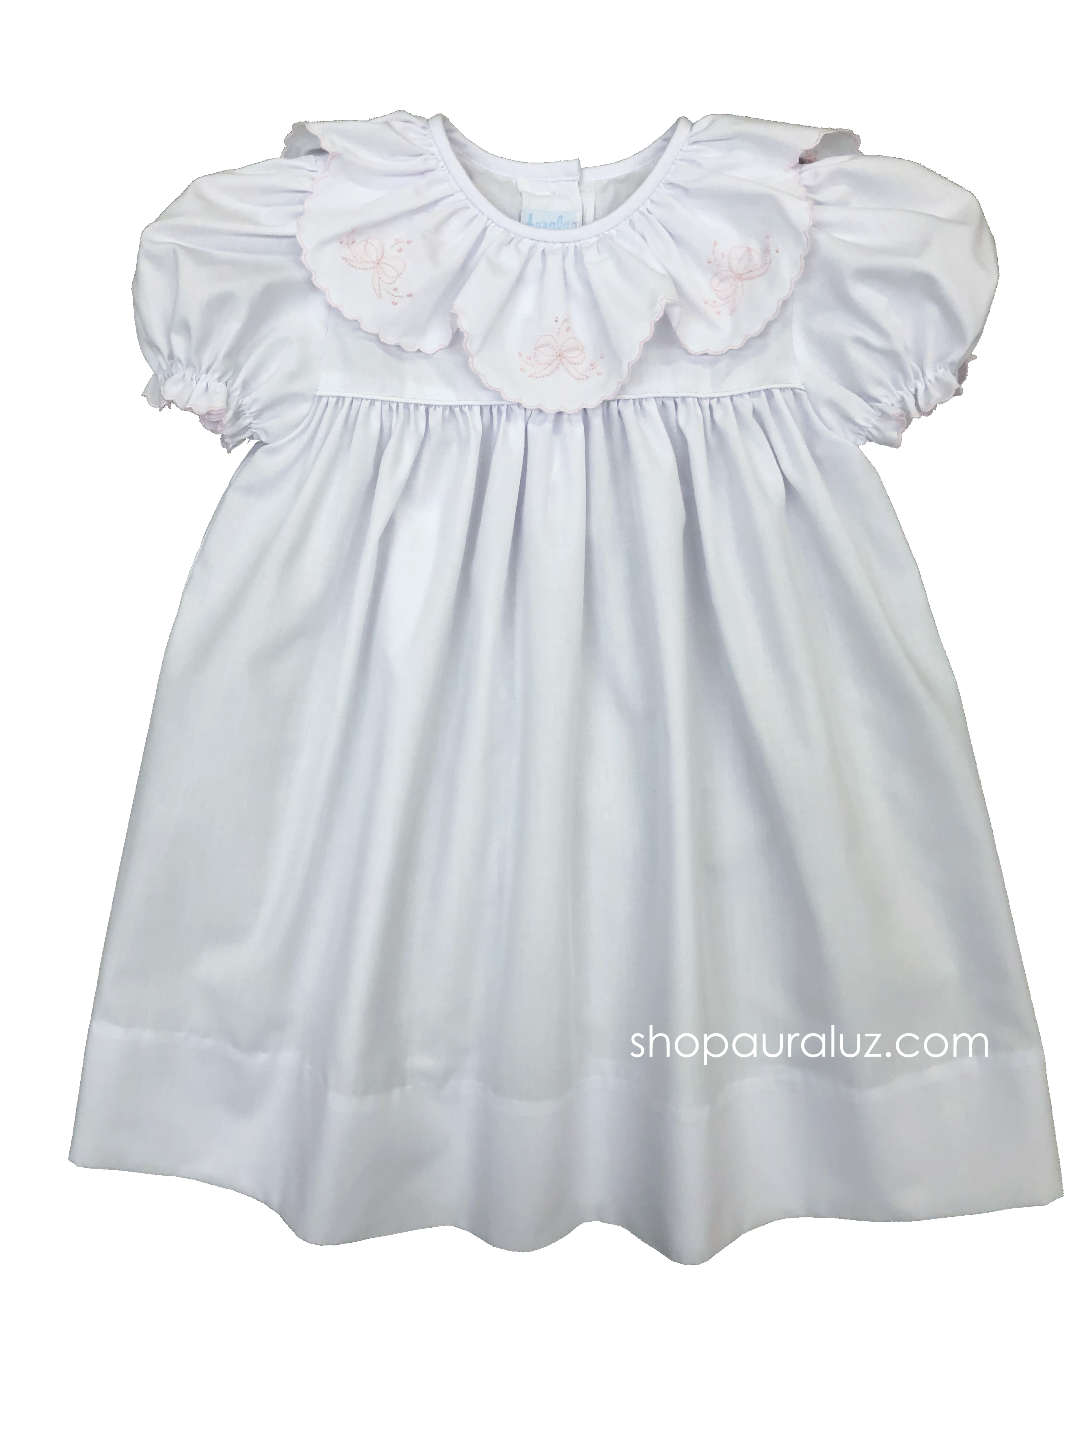 Auraluz Dress...White with ruffle collar, pink scallop trim and embroidered bows